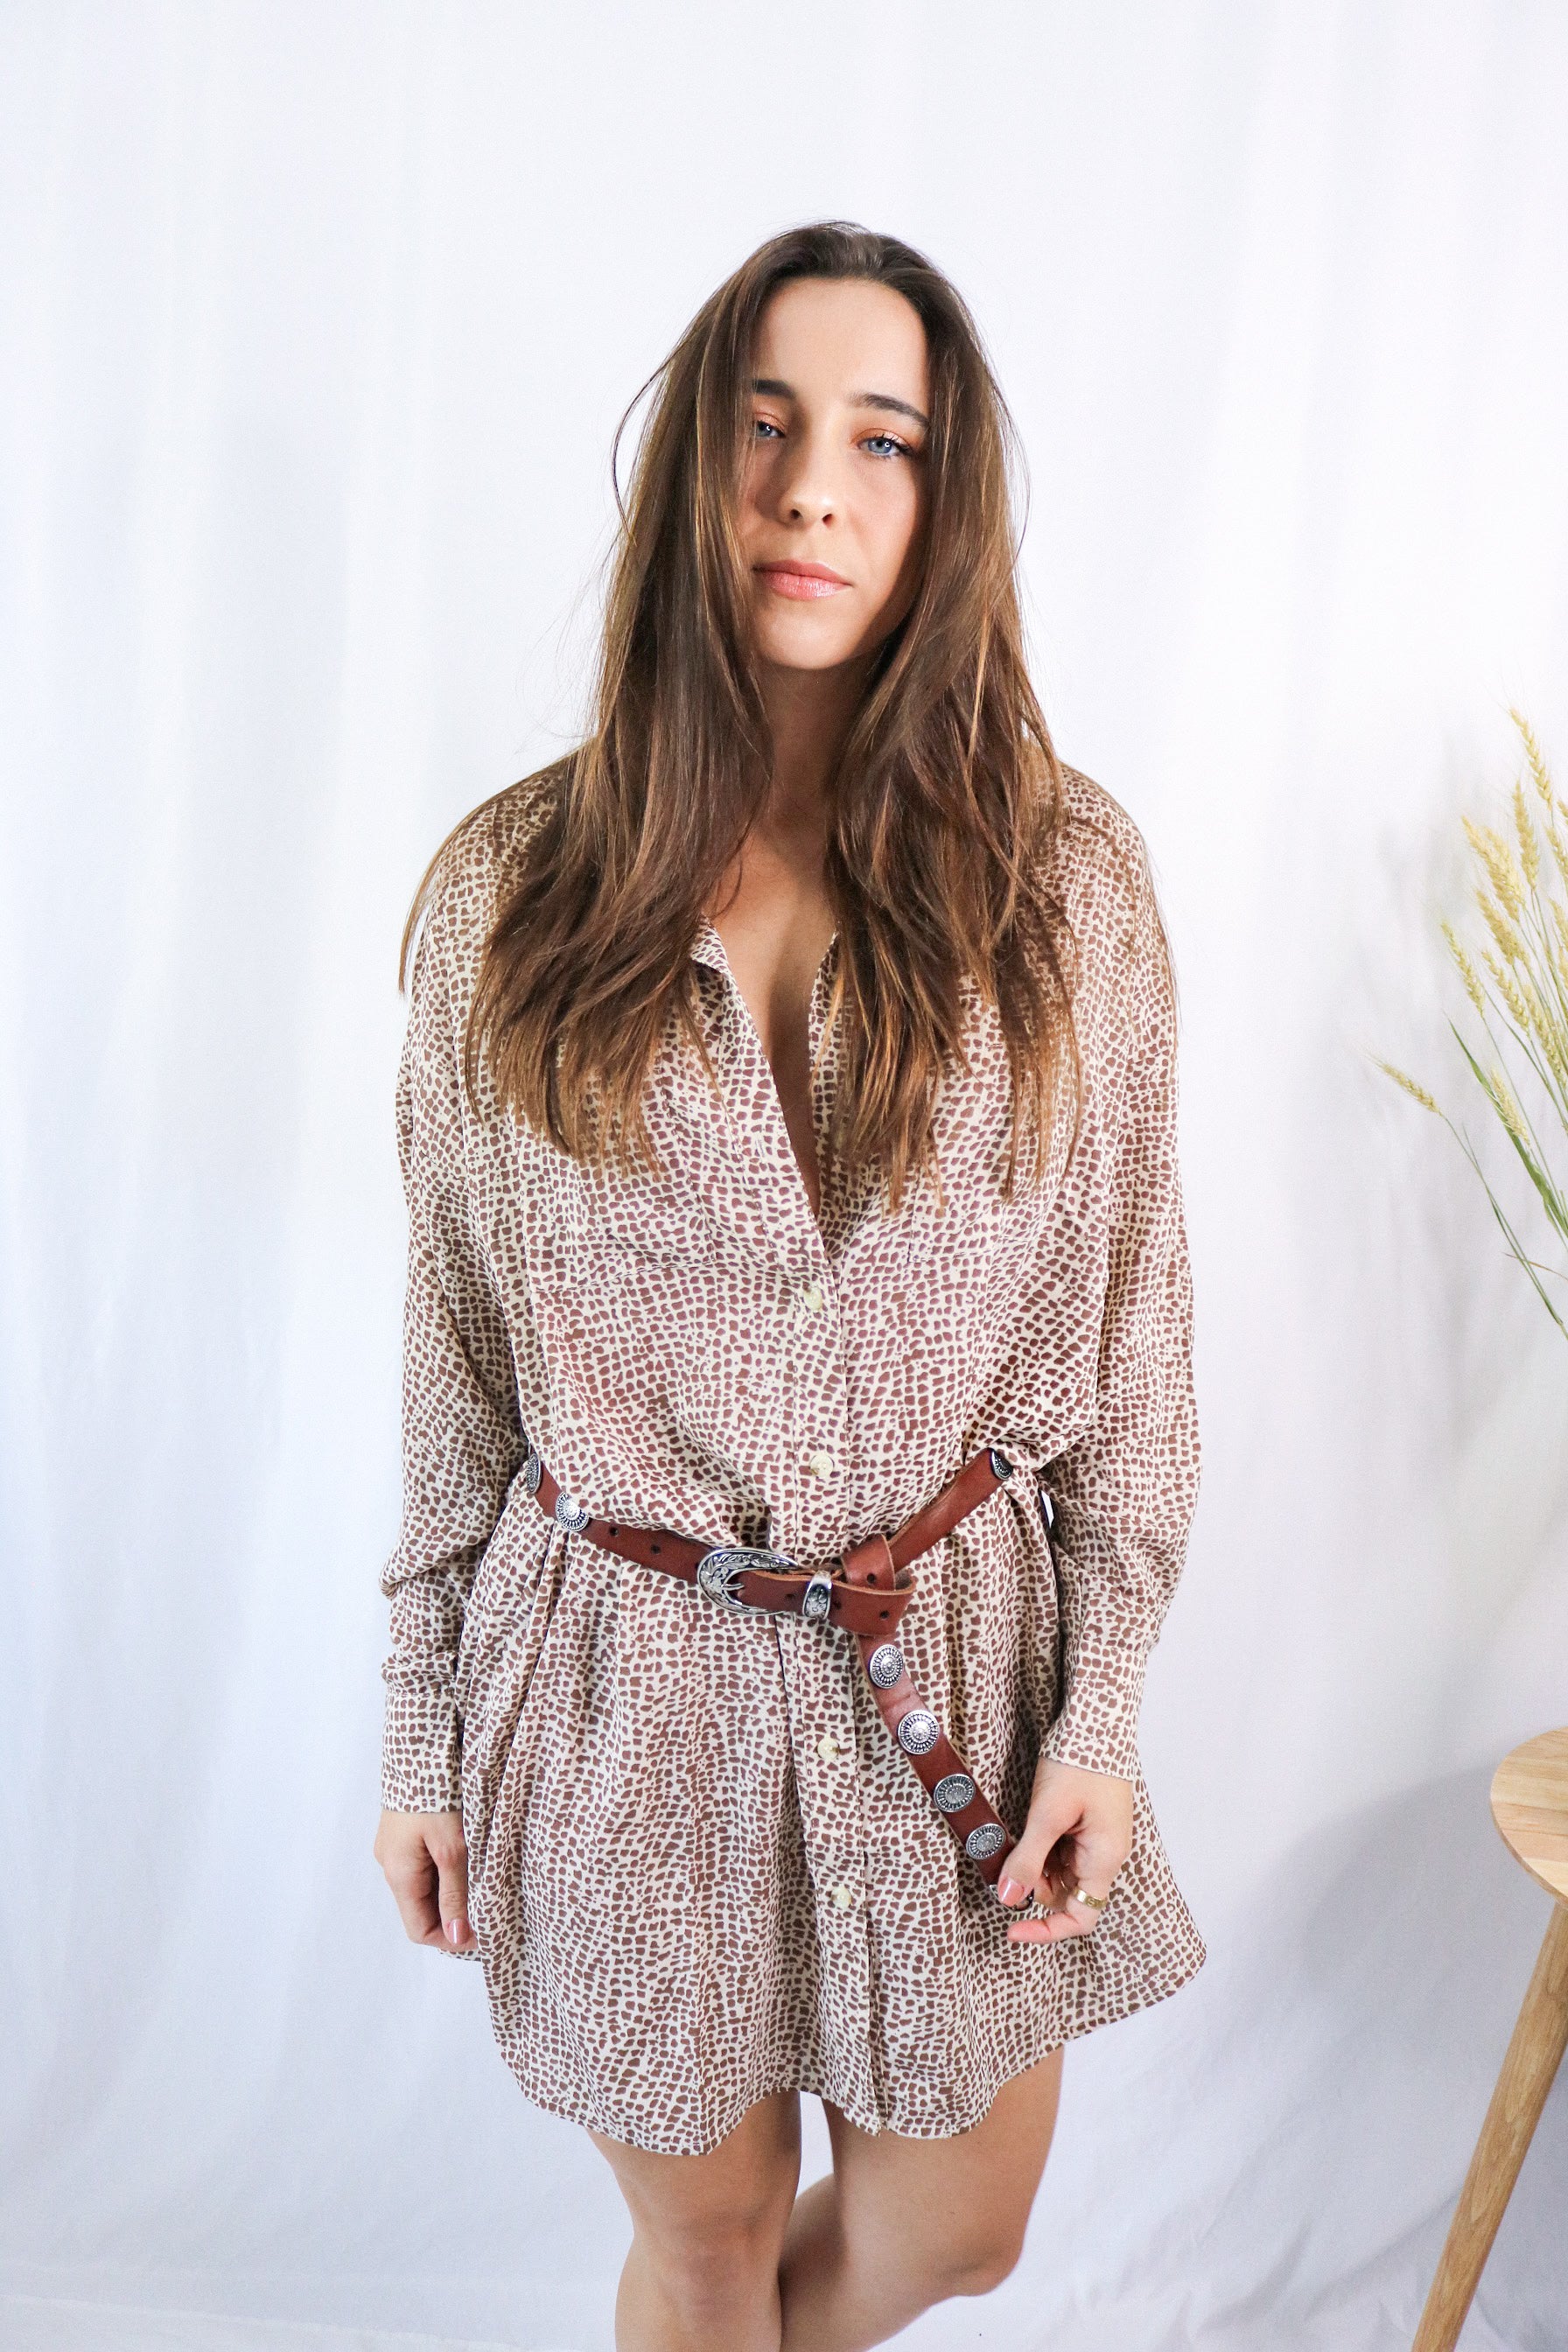 Brunette girl models a collared T-Shirt Dress in Animal Print (cheetah / leopard print). The t-shirt dress is collared, brown, and mid-length. It is a long sleeve t-shirt dress with a loose and comfortable fit and paired with a brown belt.